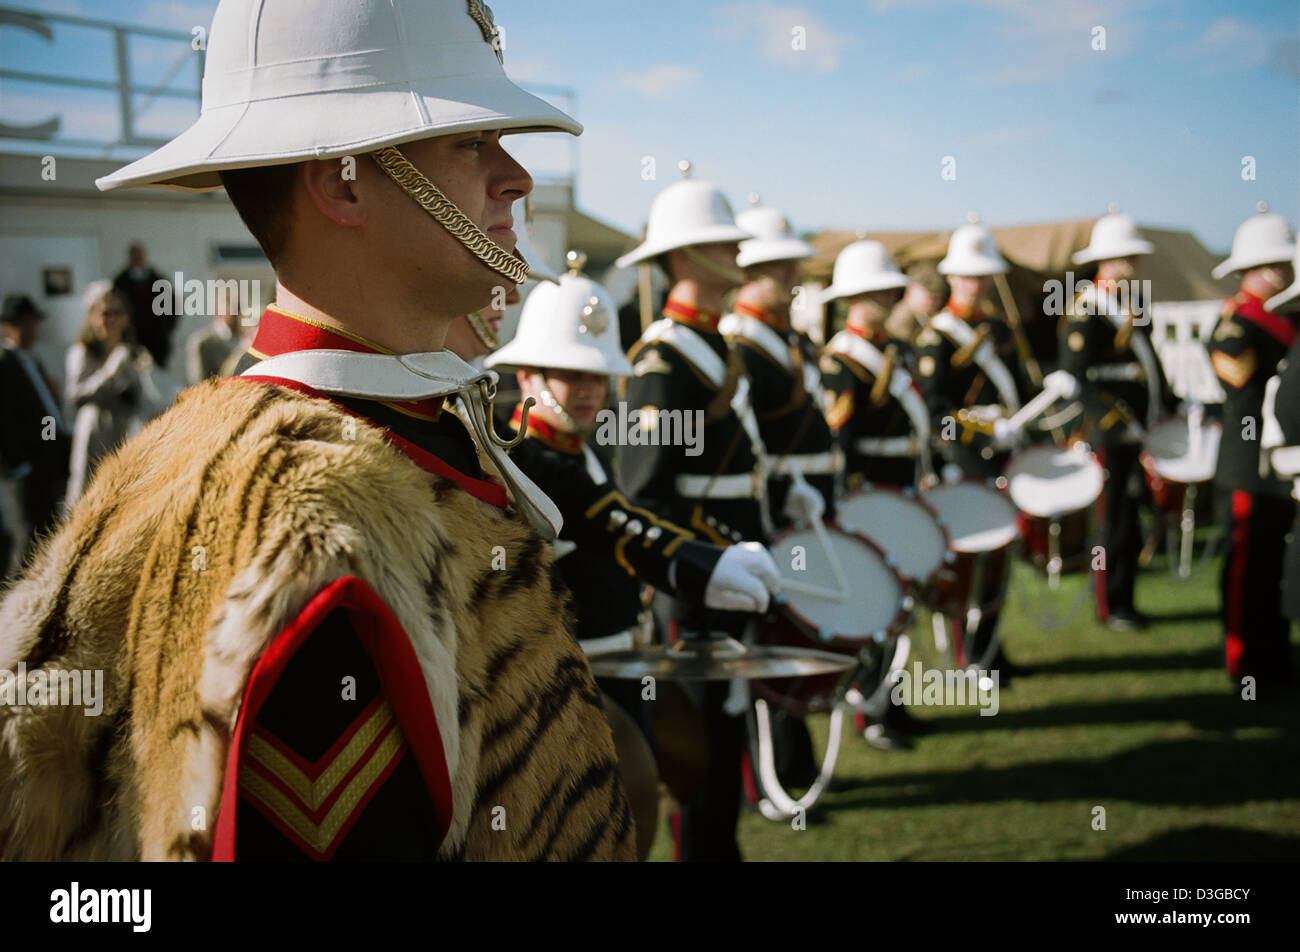 Army band at Goodwood Revival UK leopard skin drums Stock Photo